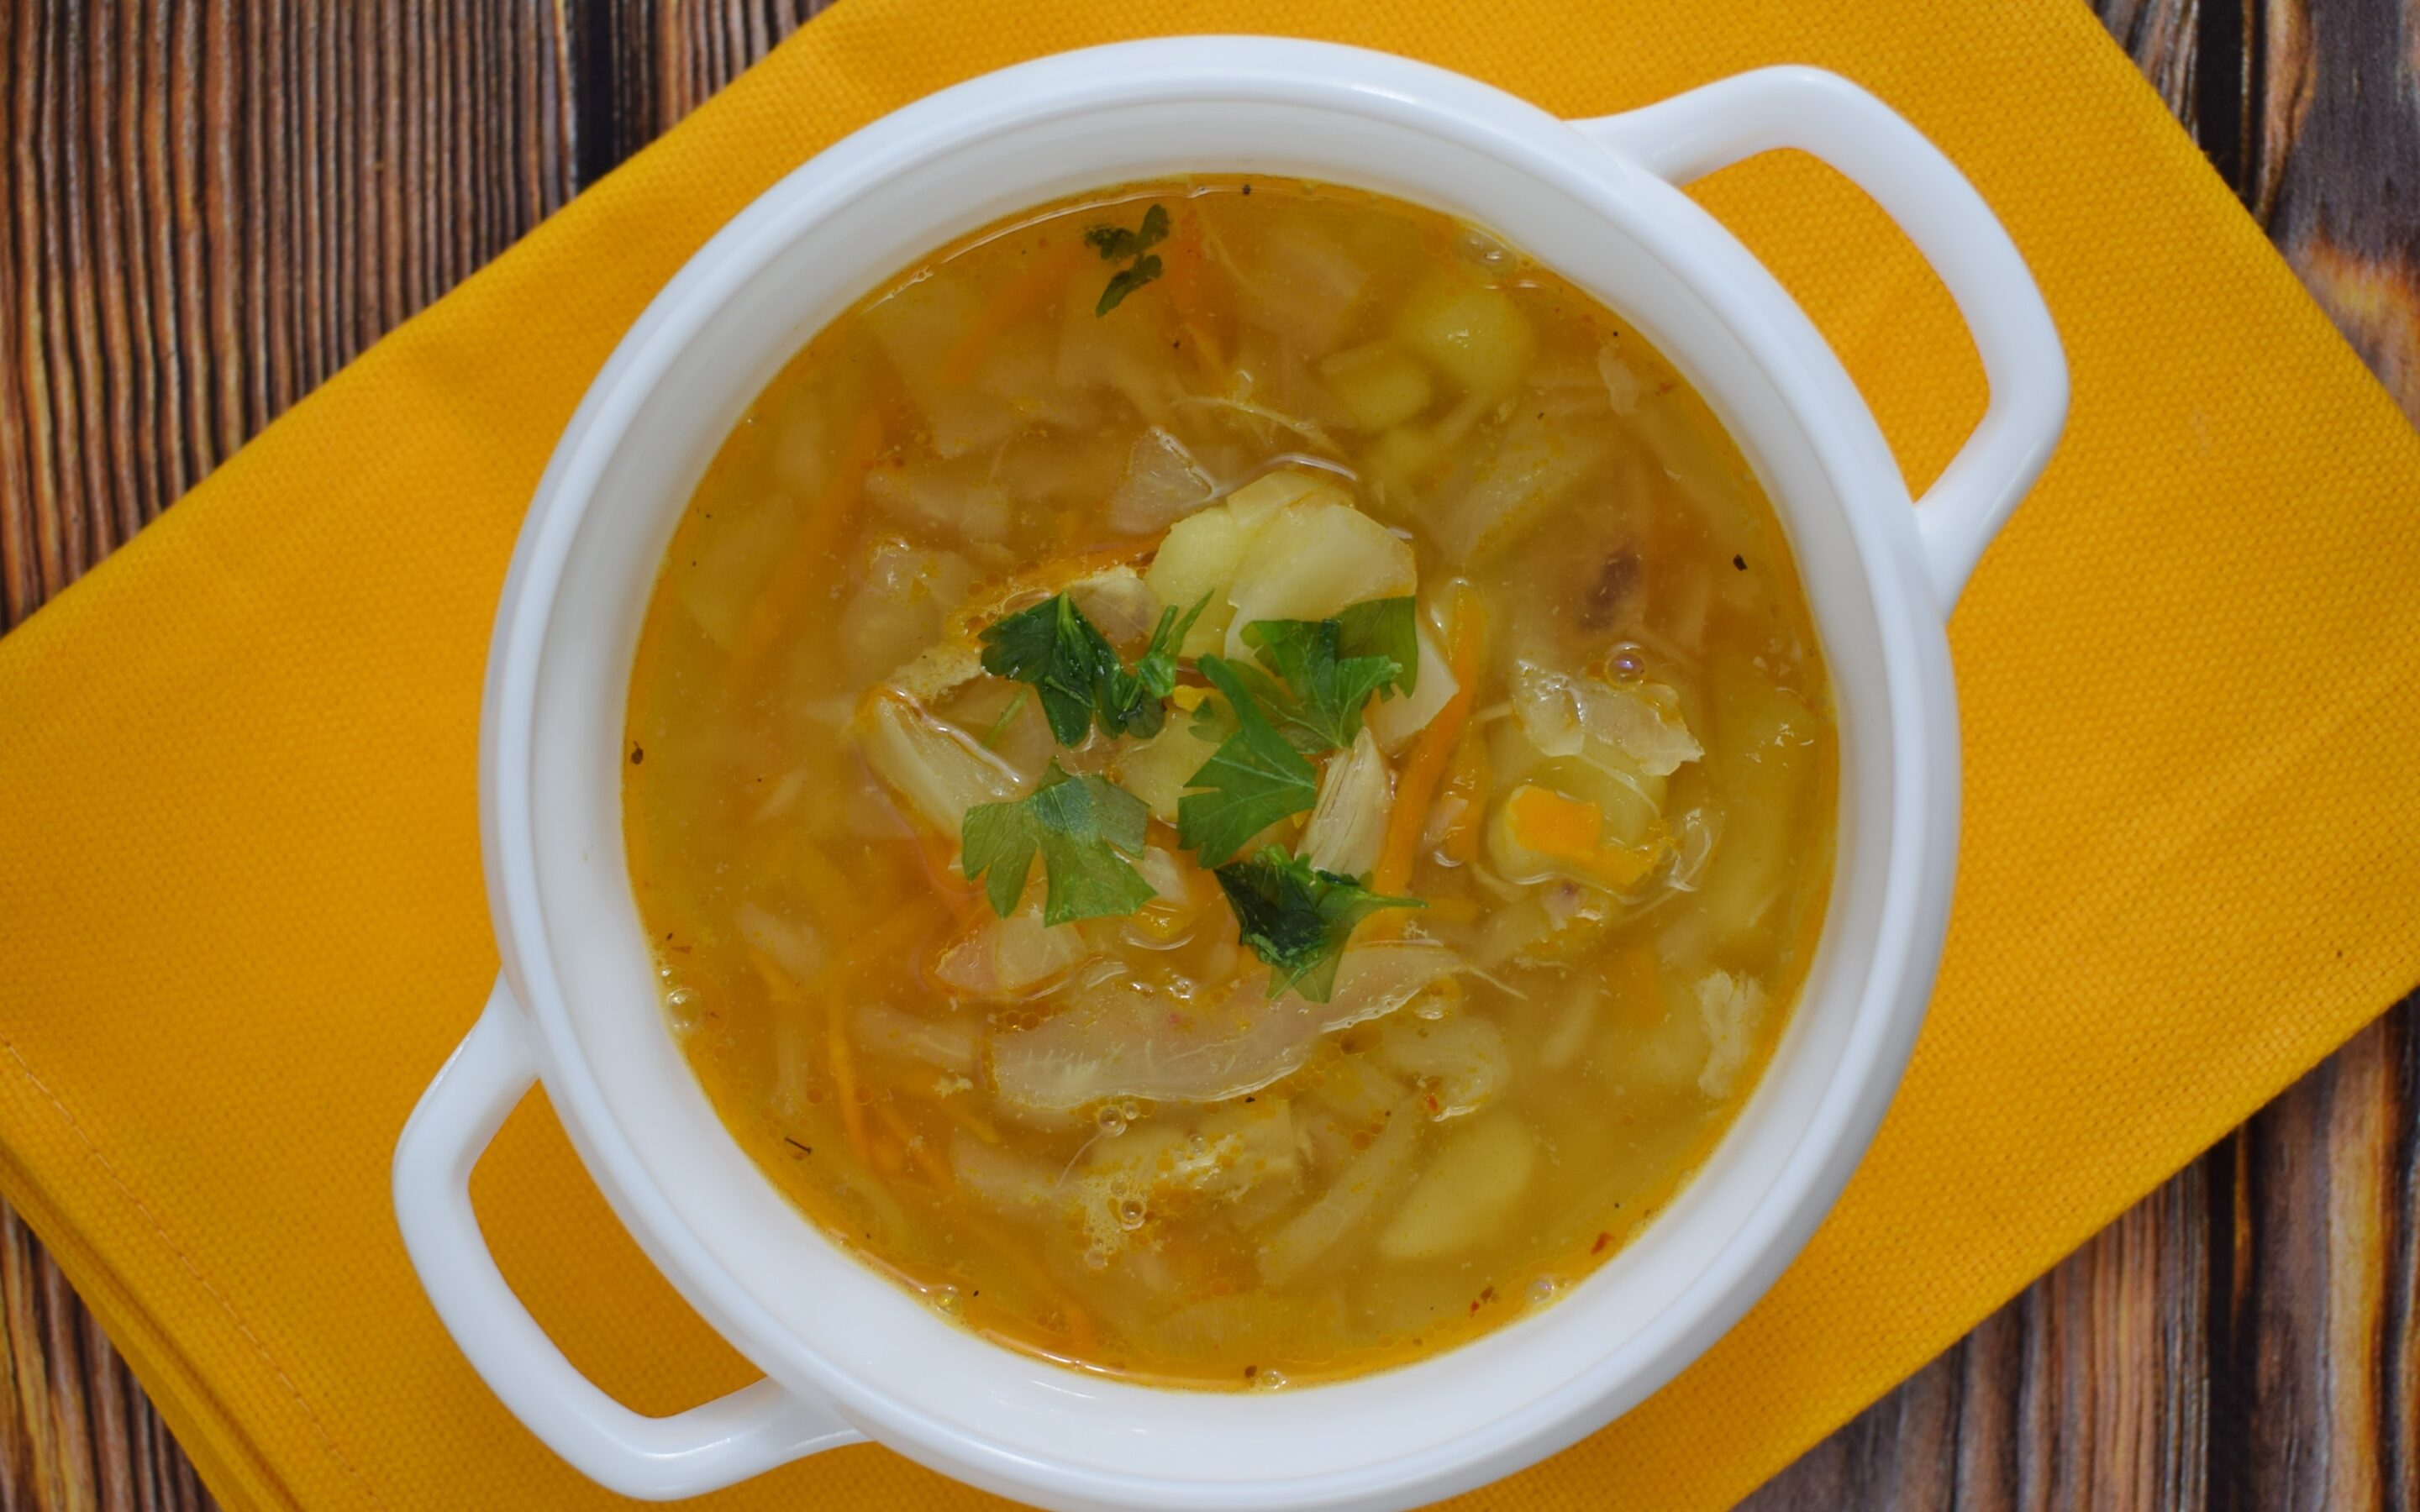 Bowl of Cabbage Vegetable Soup